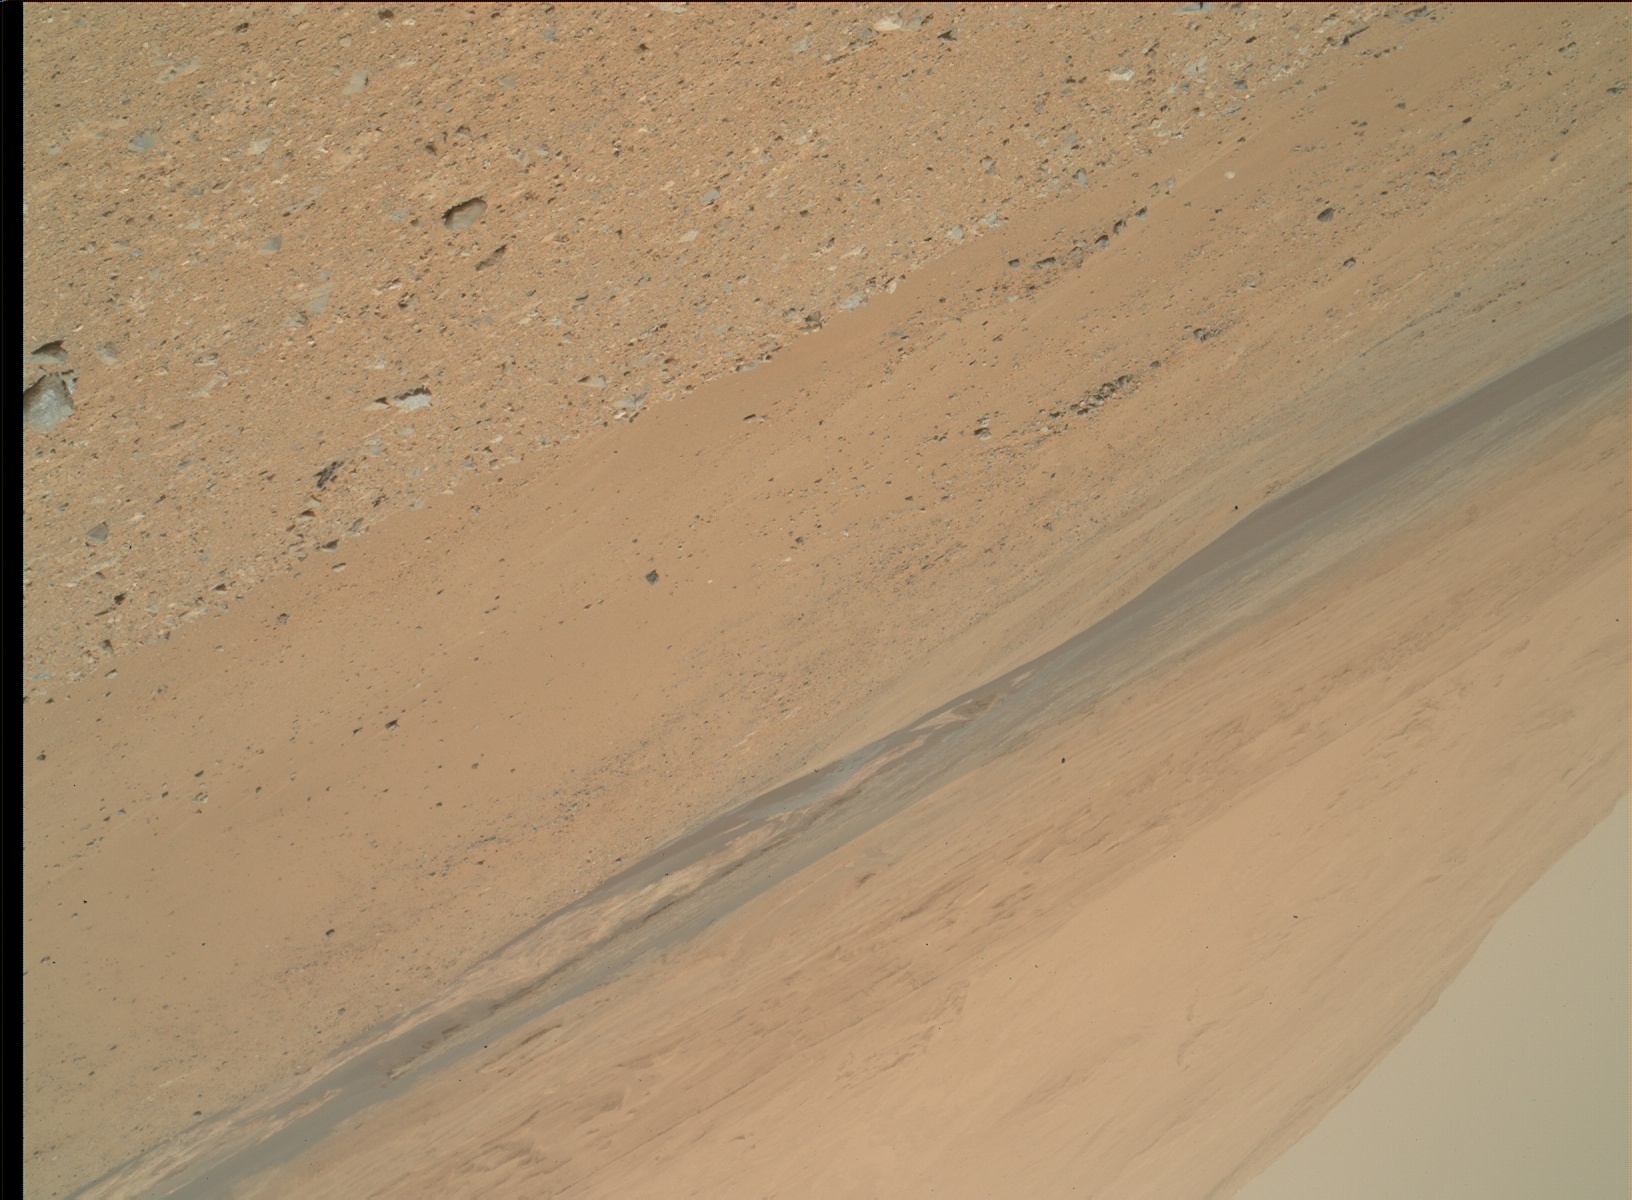 Nasa's Mars rover Curiosity acquired this image using its Mars Hand Lens Imager (MAHLI) on Sol 338